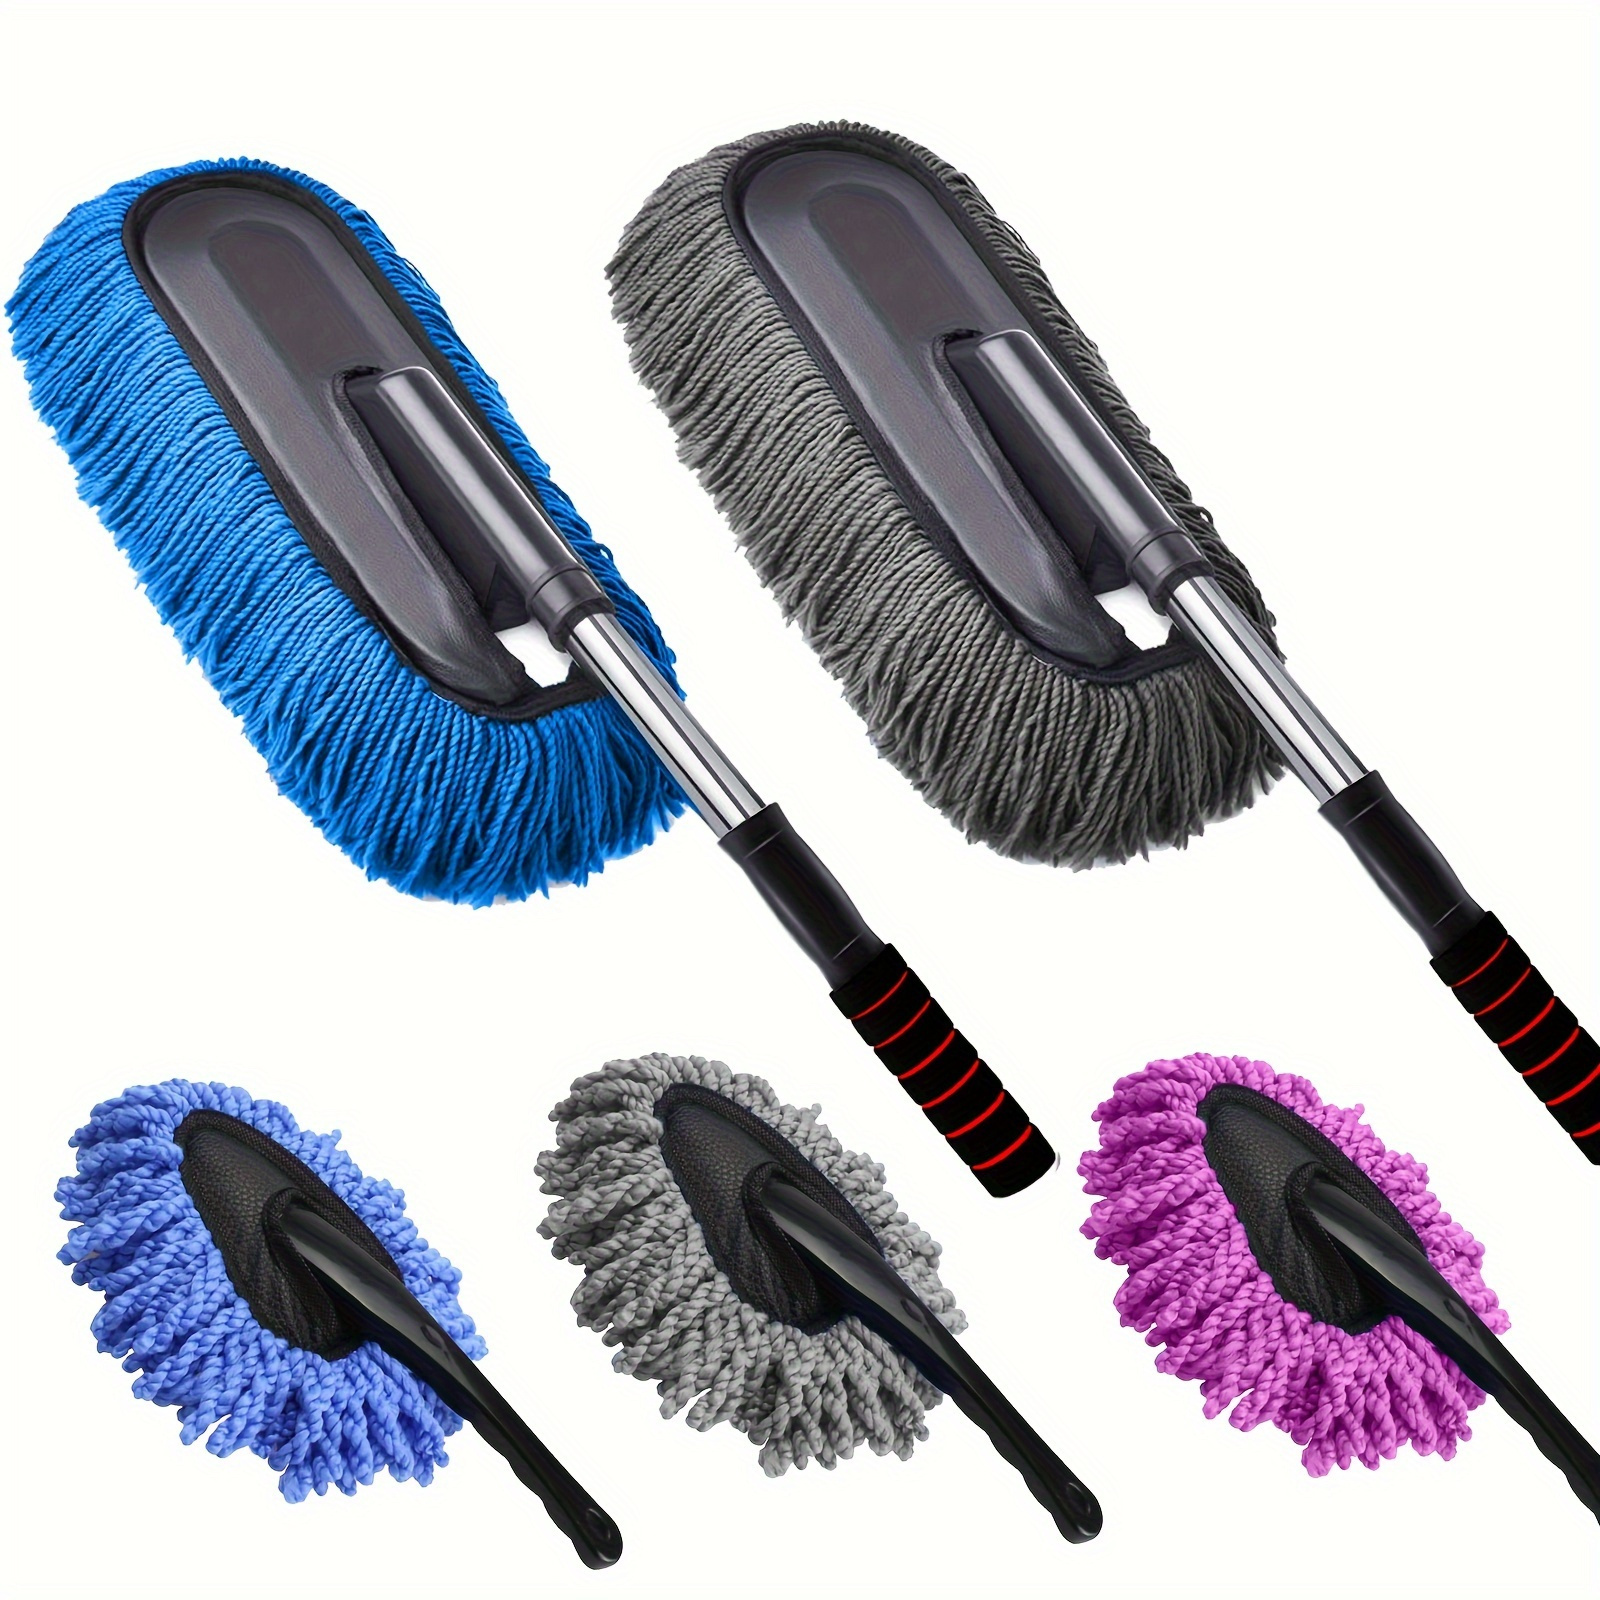 Types of Car Wash Brushes, Foamy Brush Materials